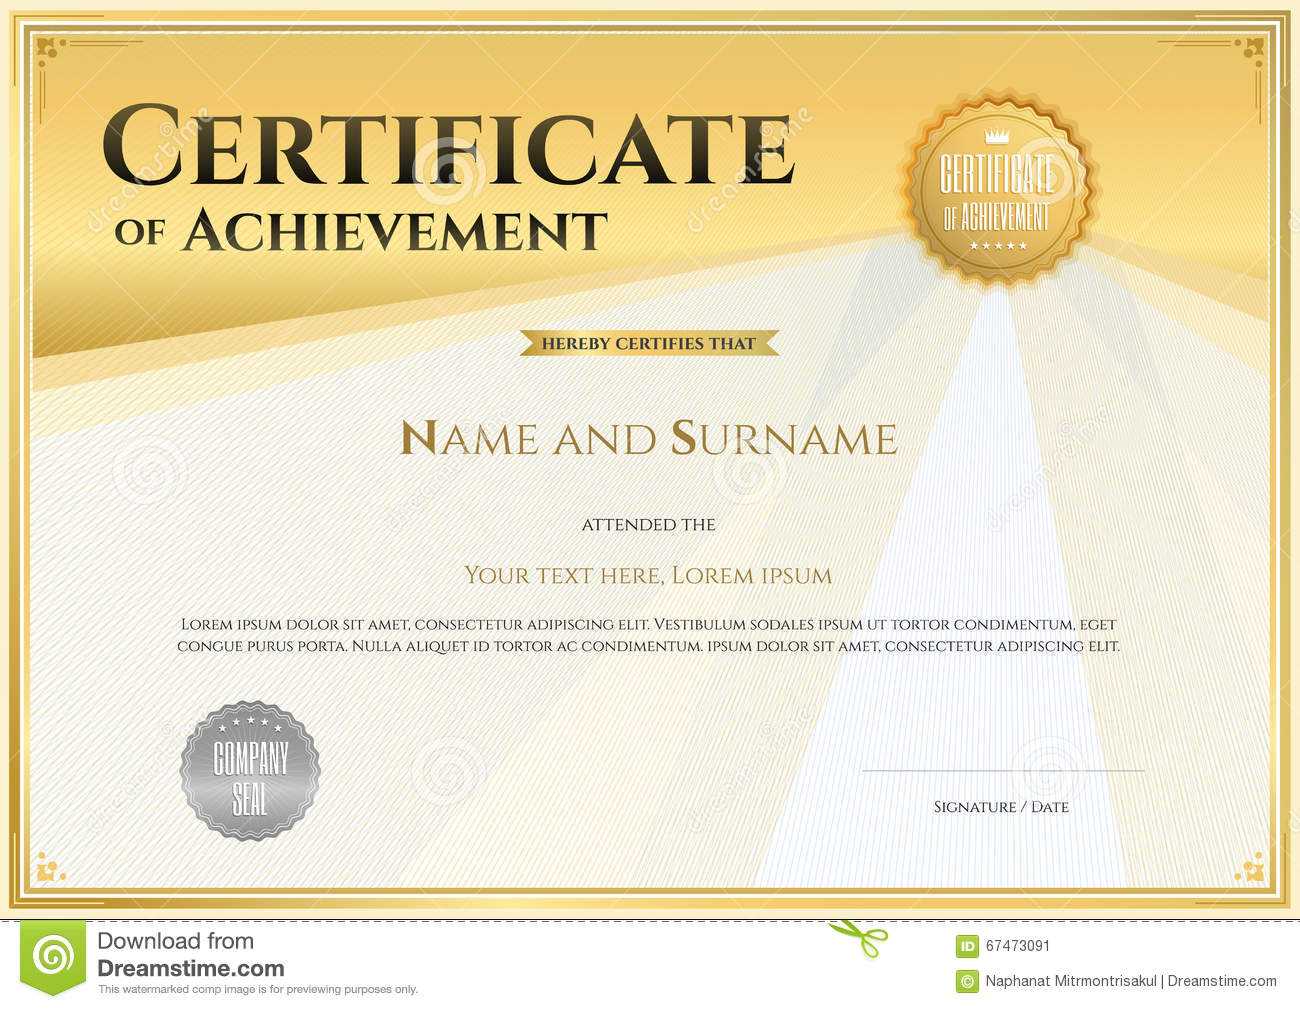 Certificate Template In Vector For Achievement Graduation Throughout Sales Certificate Template